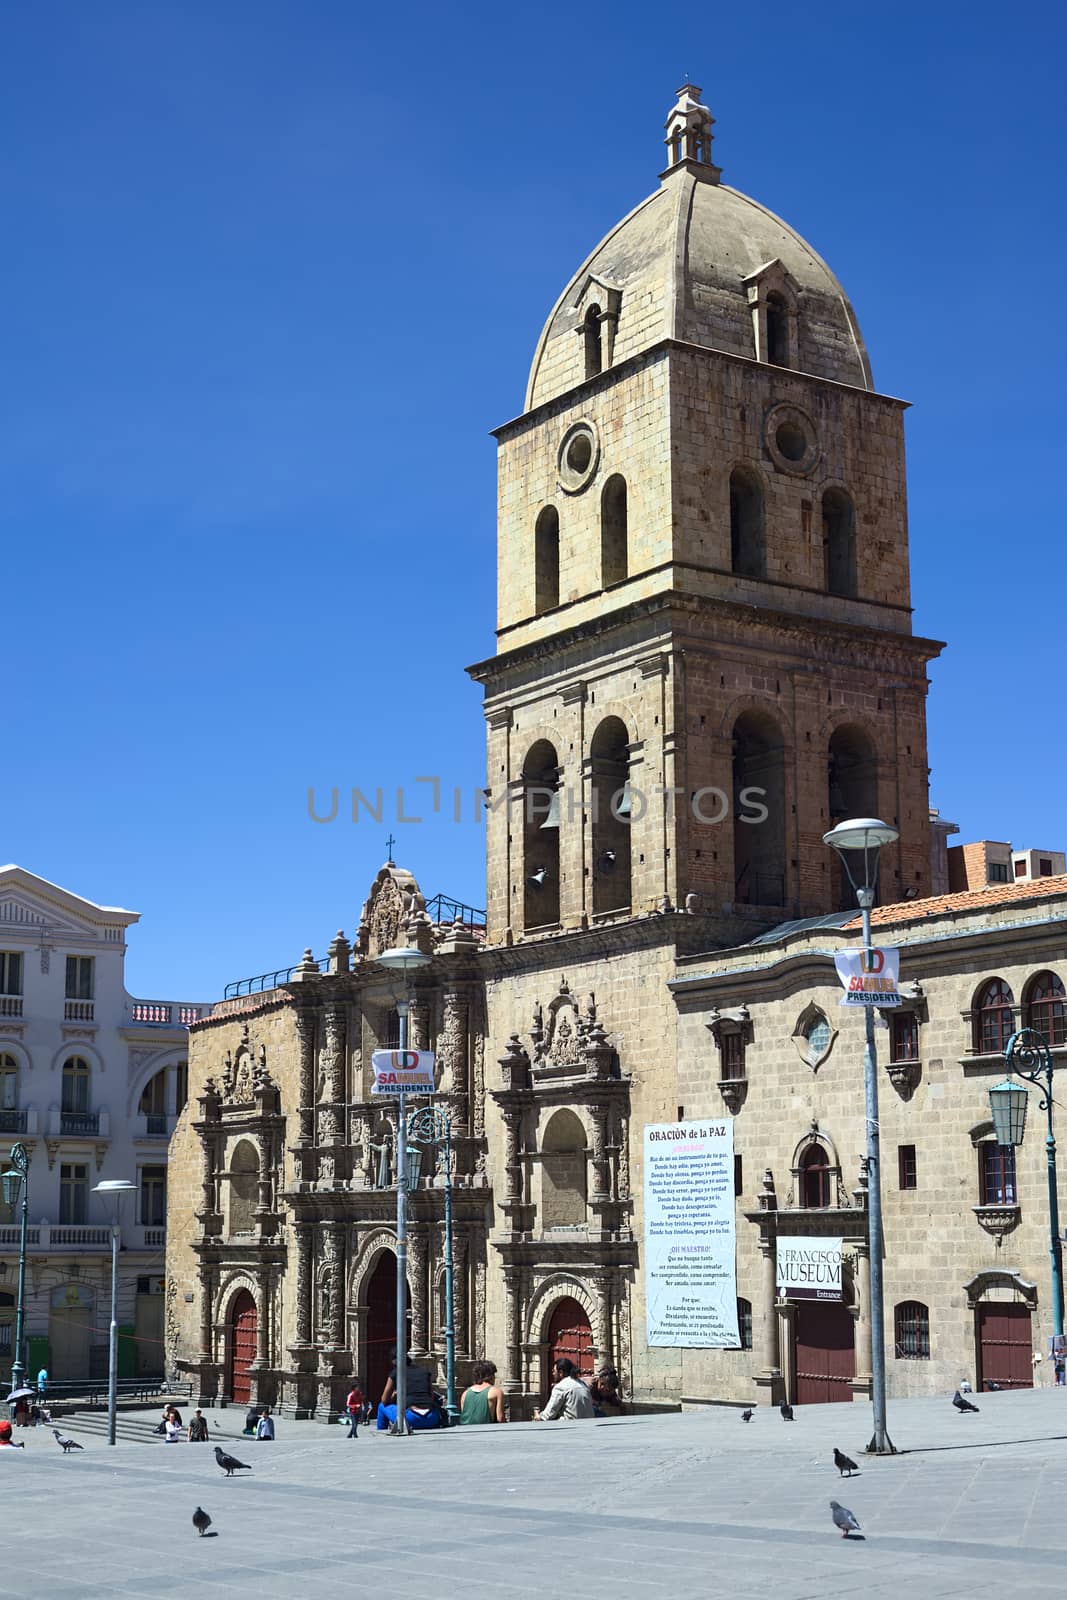 LA PAZ, BOLIVIA - OCTOBER 12, 2014: Unidentified people on San Francisco square in front of the Basilica of San Francisco in the city center on October 12, 2014 in La Paz, Bolivia